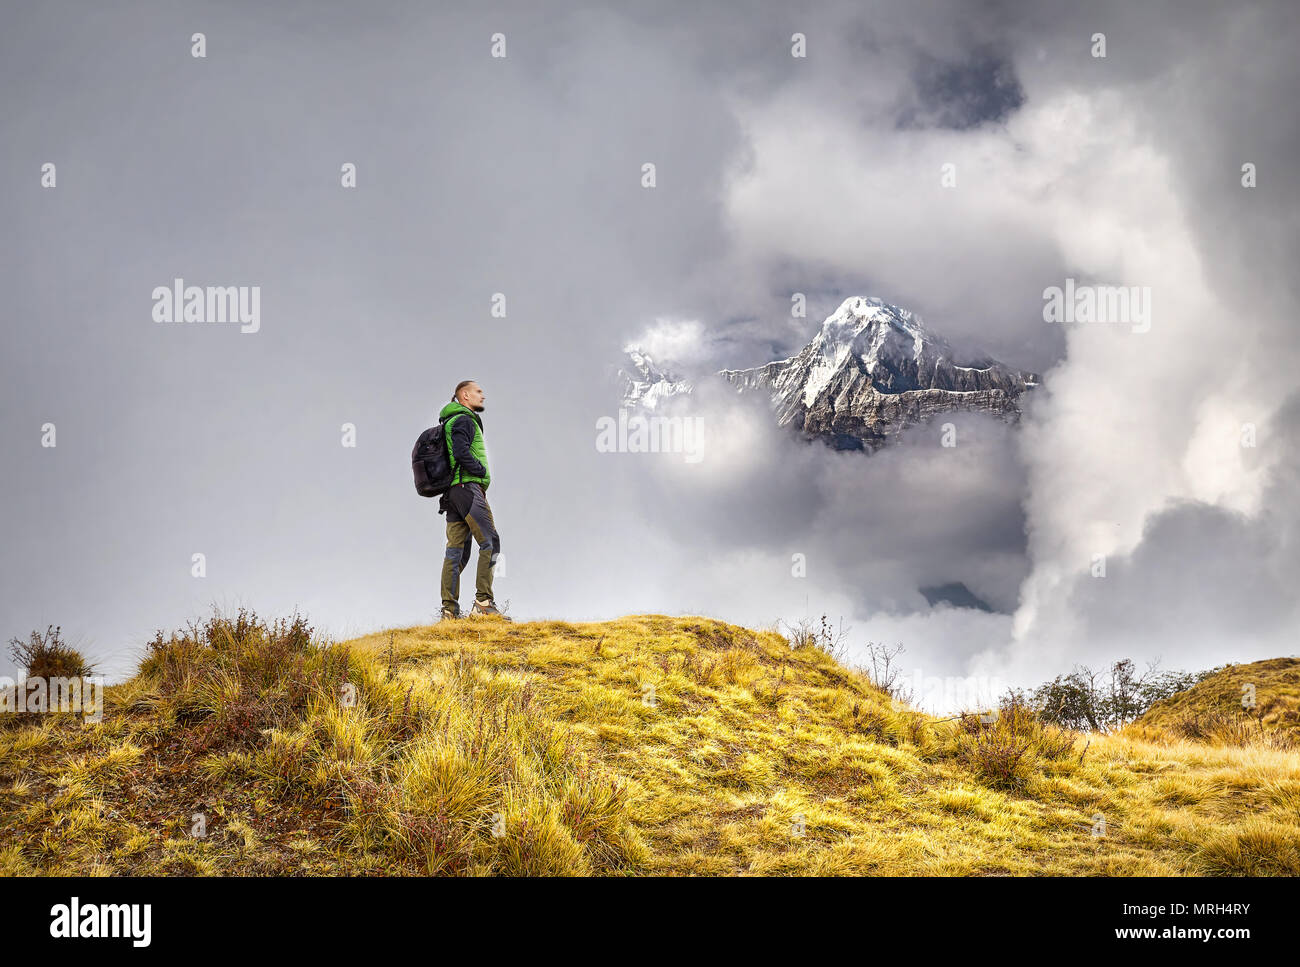 Tourist with backpack enjoying the view of snowy Himalayan Mountain at cloudy sky in Nepal Stock Photo